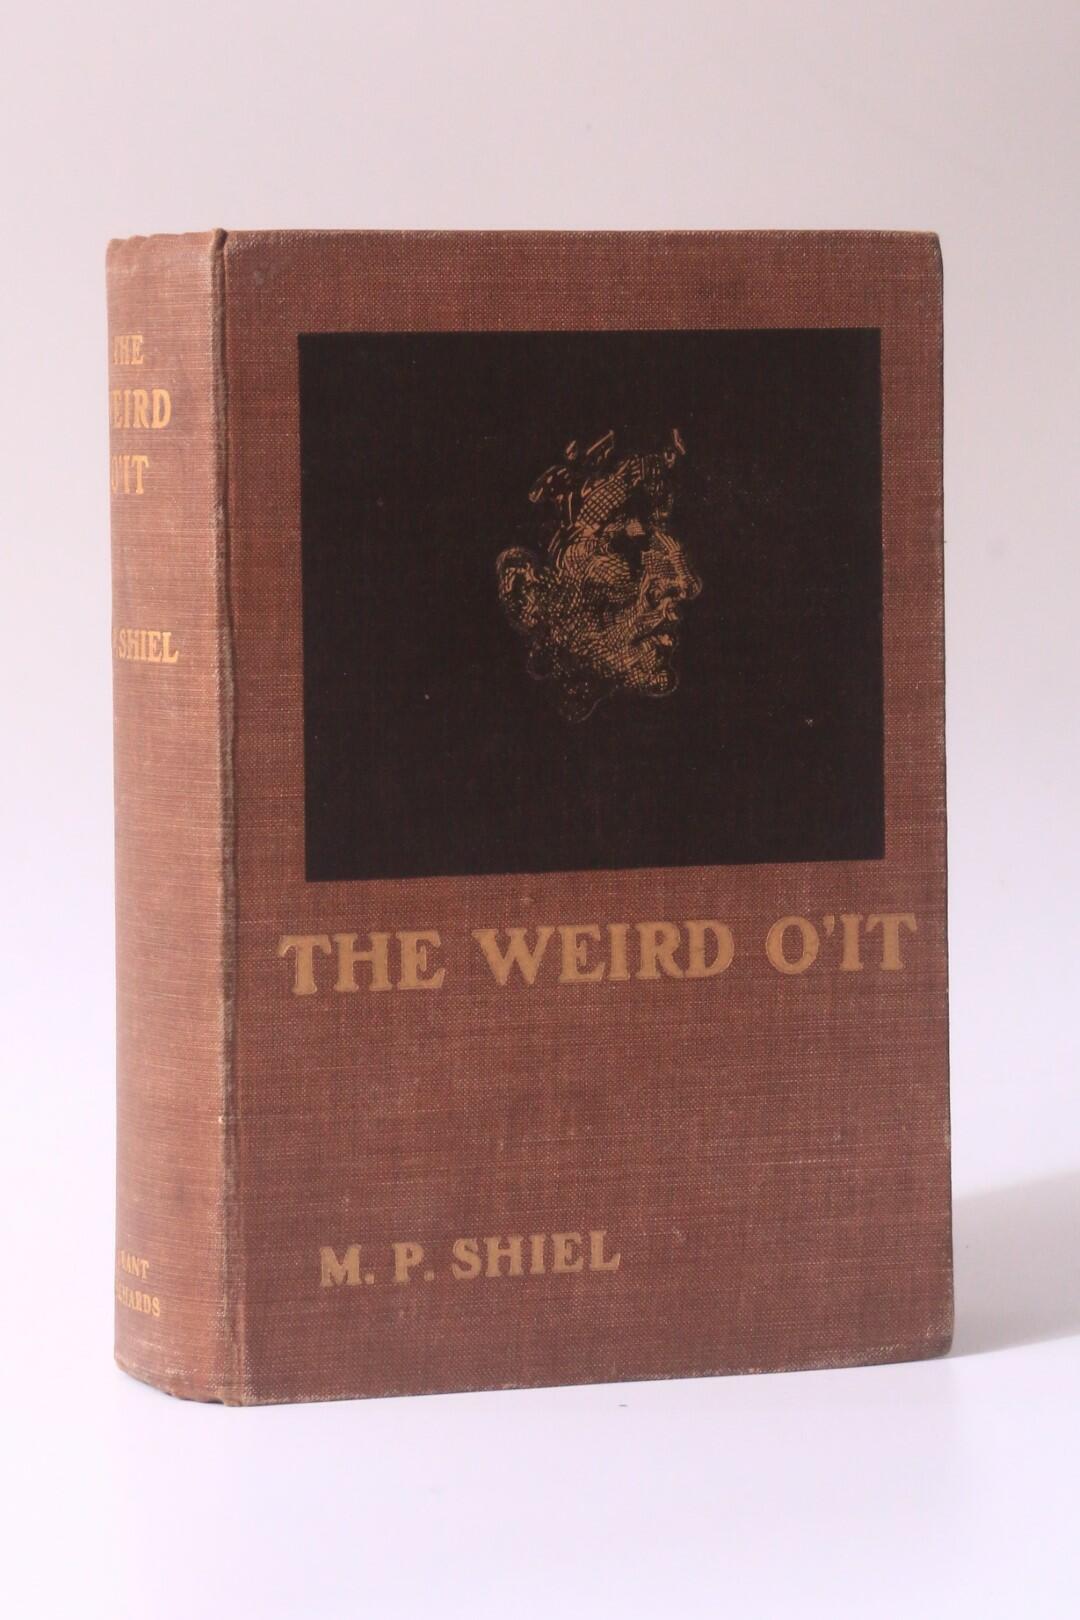 M.P. Shiel - The Weird O'It - Grant Richards, 1902, First Edition.